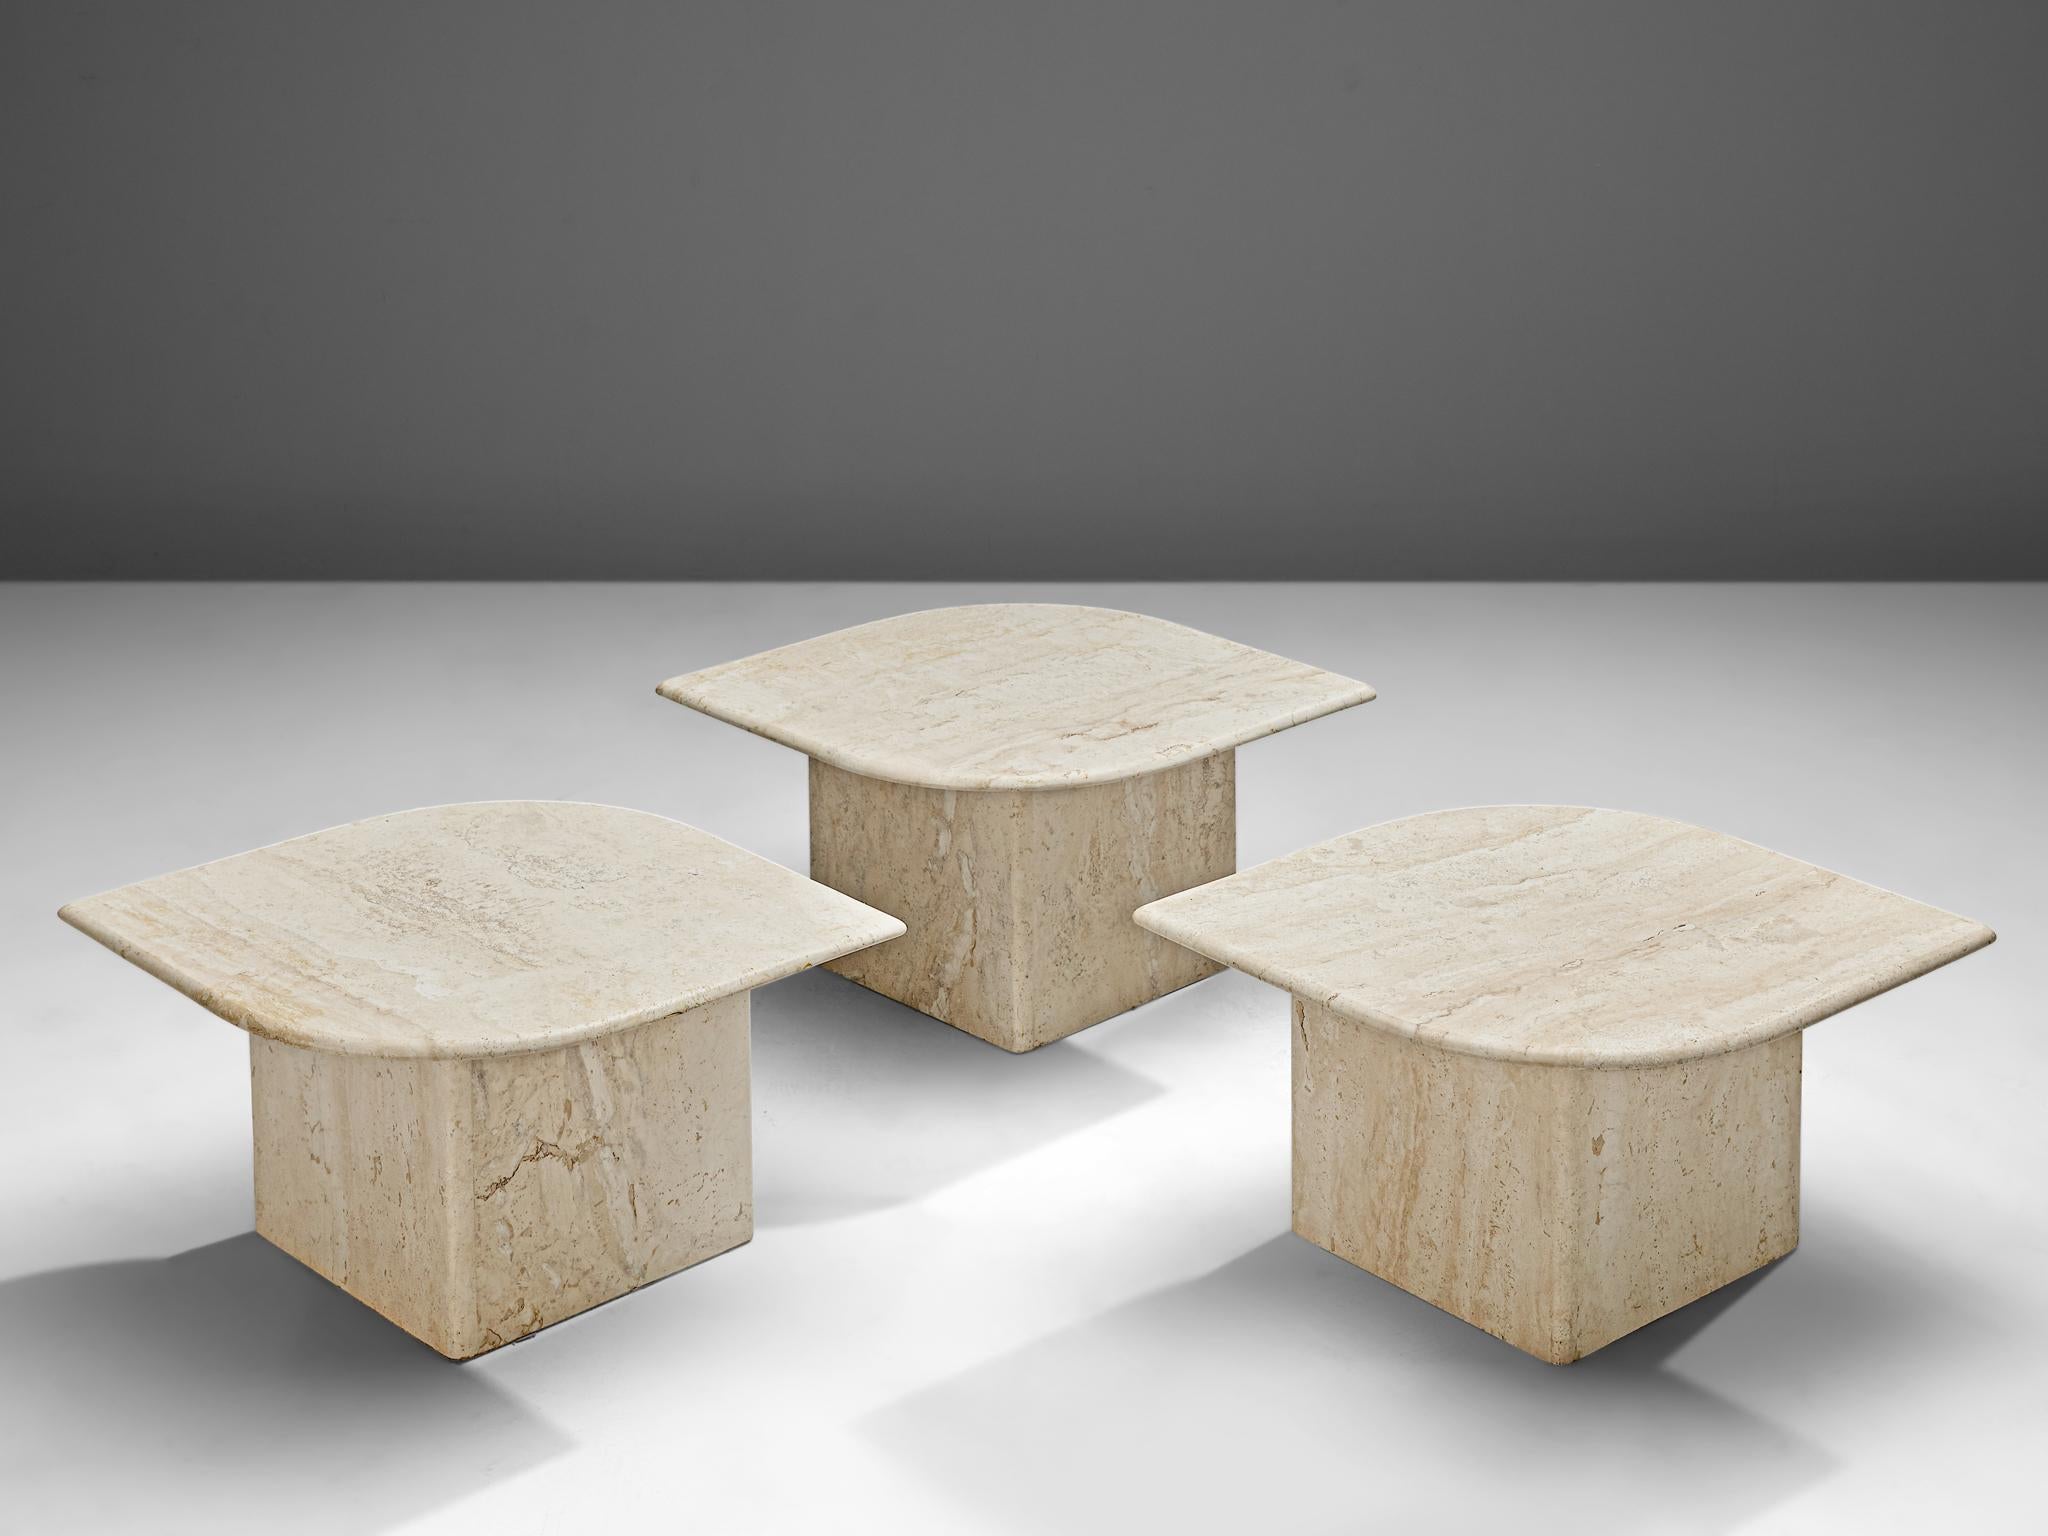 Set of three coffee tables, travertine, Italy, 1970s

These coffee tables feature an eye-shaped travertine tabletop on a L-shaped base. Depending on the way how you place the tables, the base either gives the impression of a block or the true